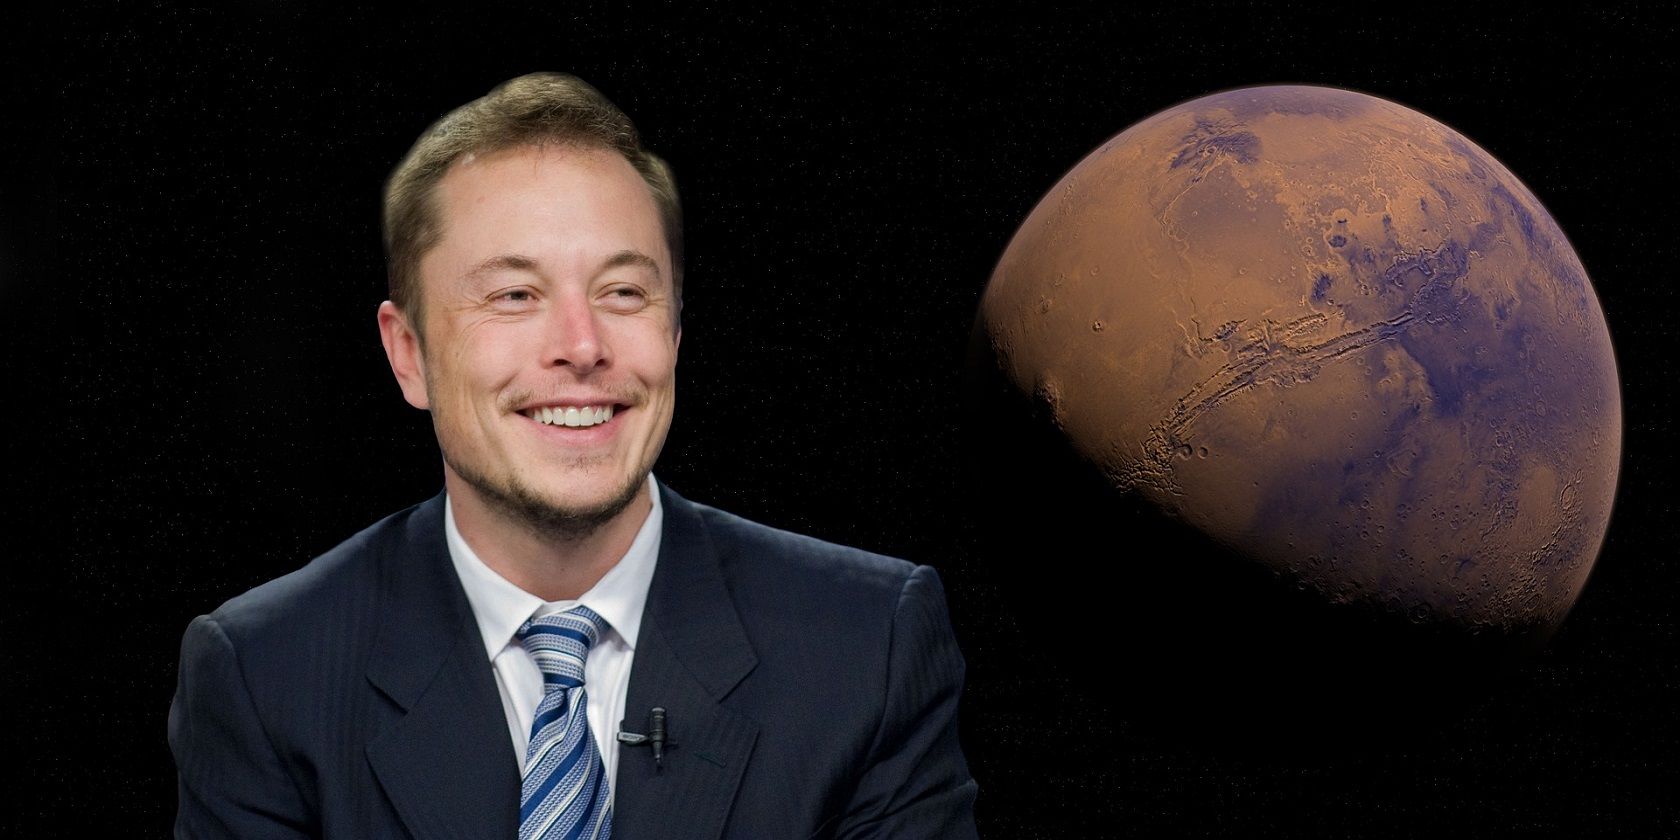 A smiling Elon Musk next to an image of Mars